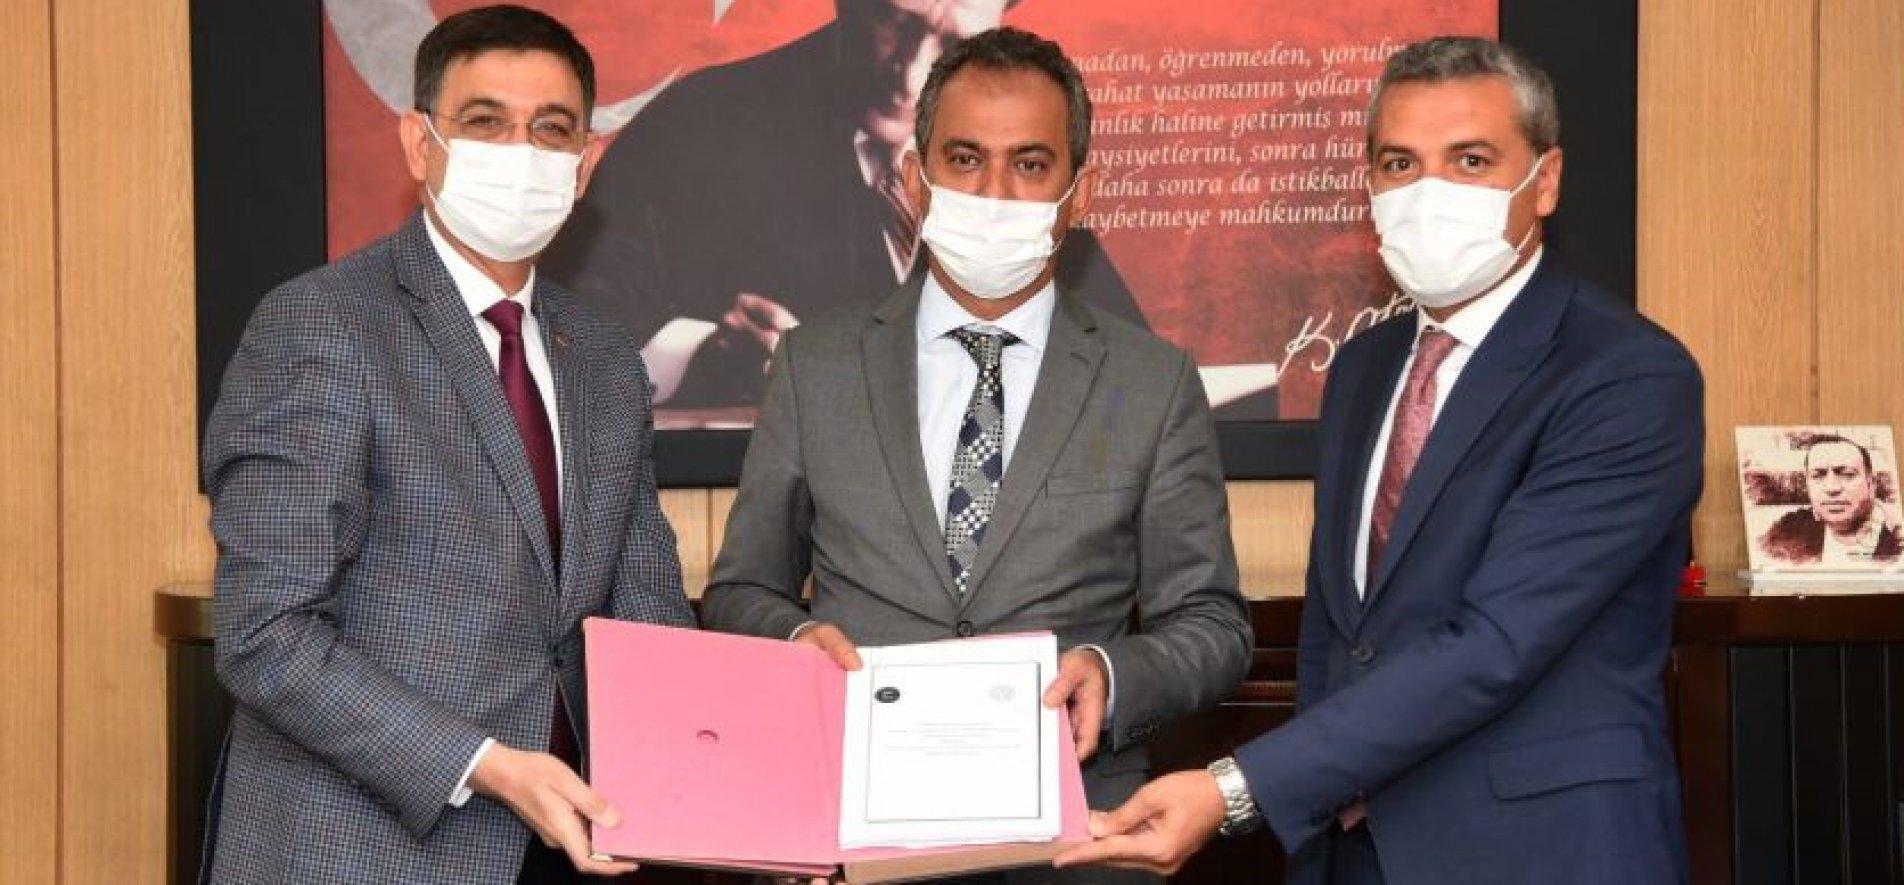 PERFECTION CENTER ABOUT CNC OPERATION AND WELDING TECHNOLOGY WILL BE FOUNDED IN GAZİANTEP